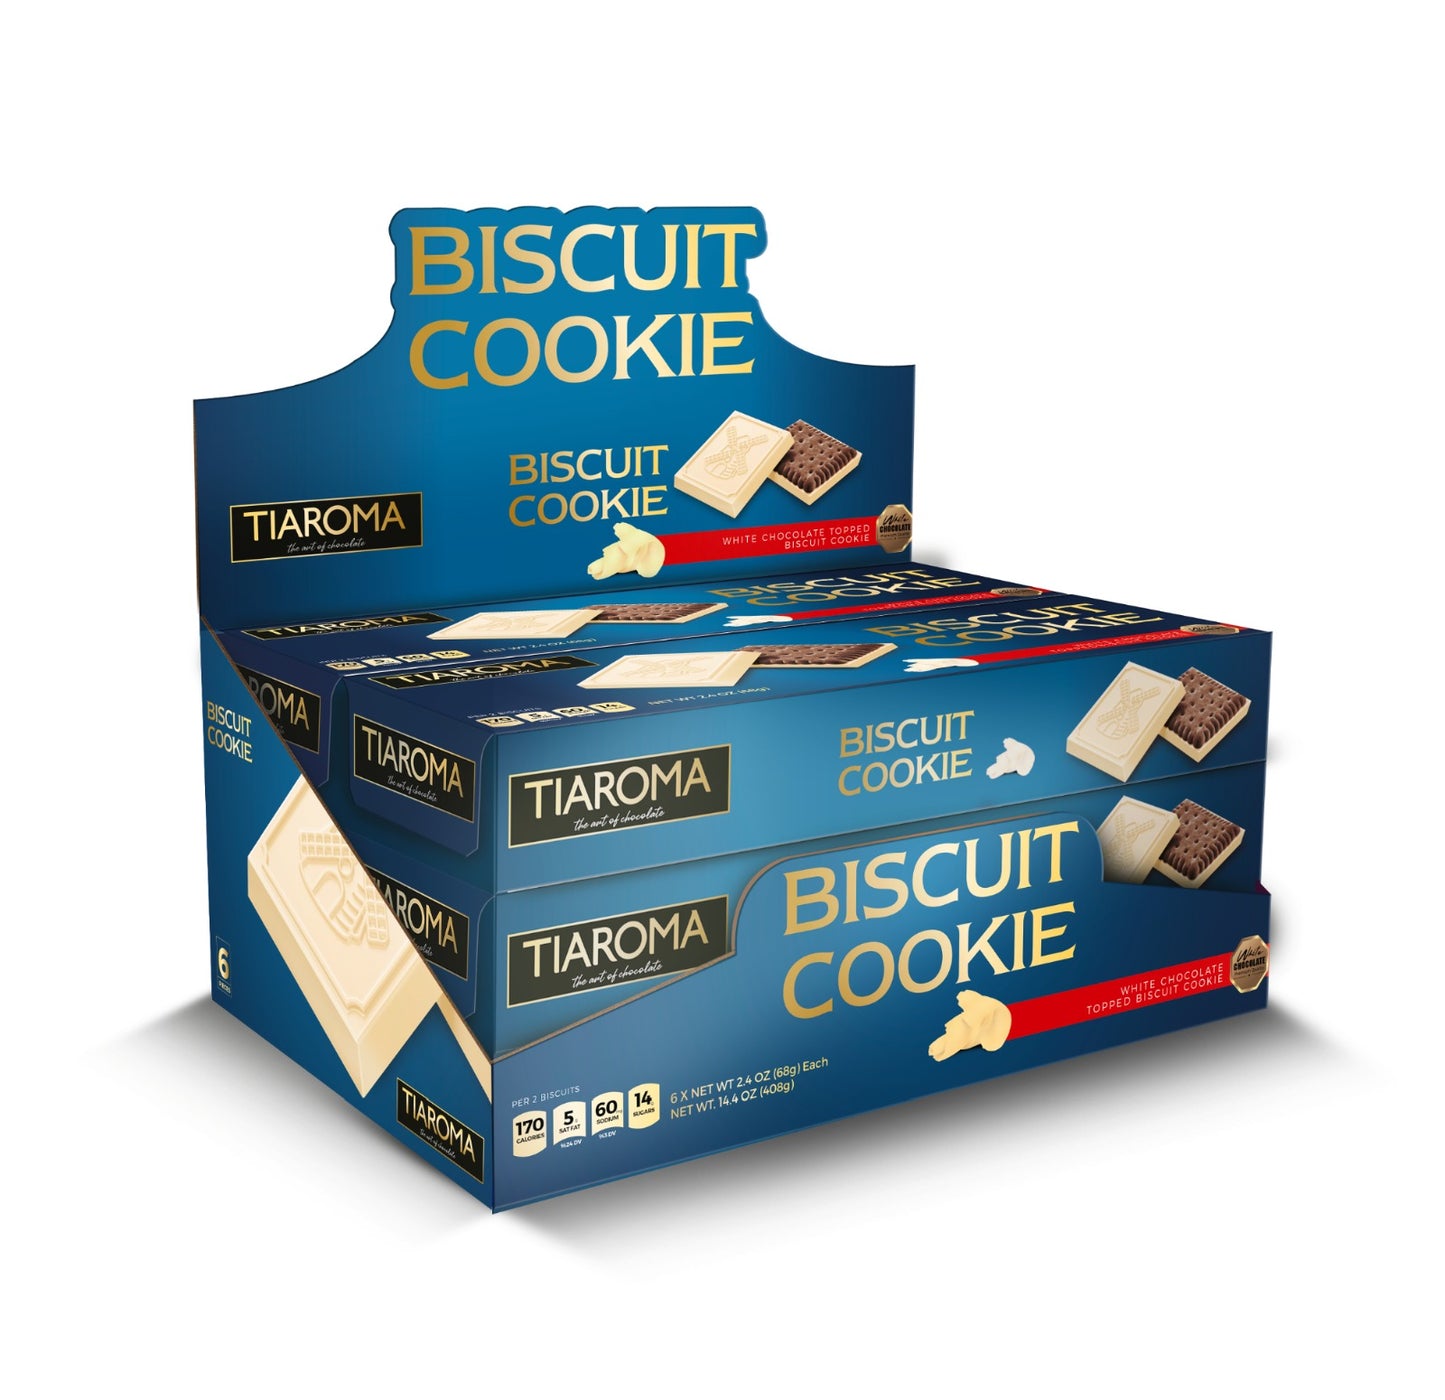 White Chocolate Topped Biscuit Cookie - Premium Quality European Petit Biscuit (Individually Boxed, Pack of 6)